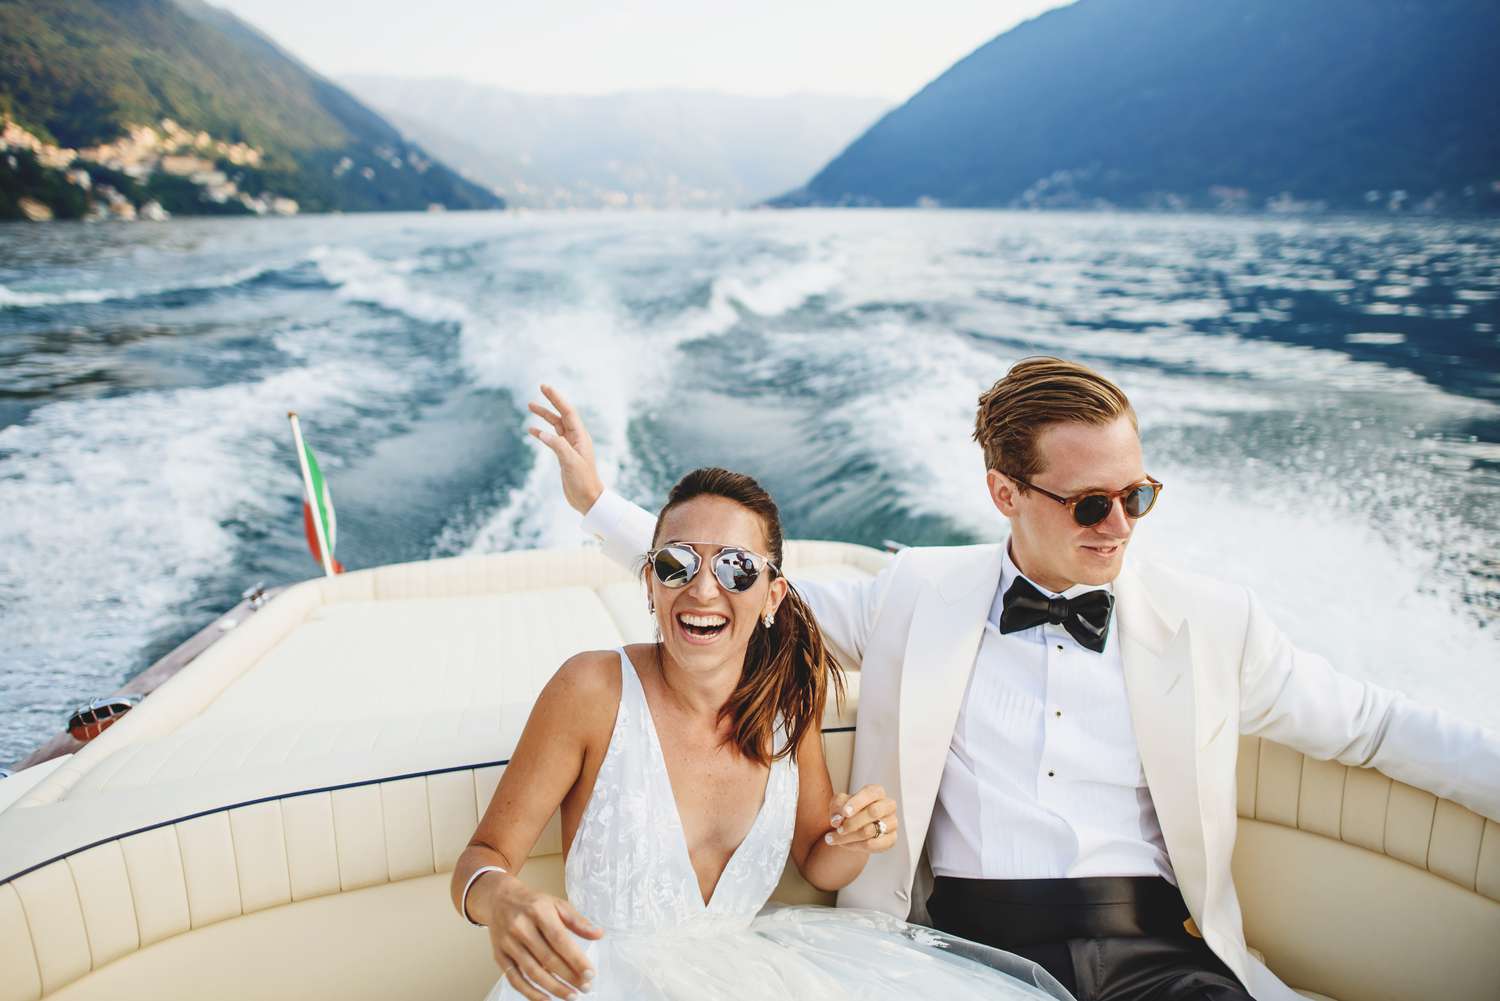 bride and groom riding on boat